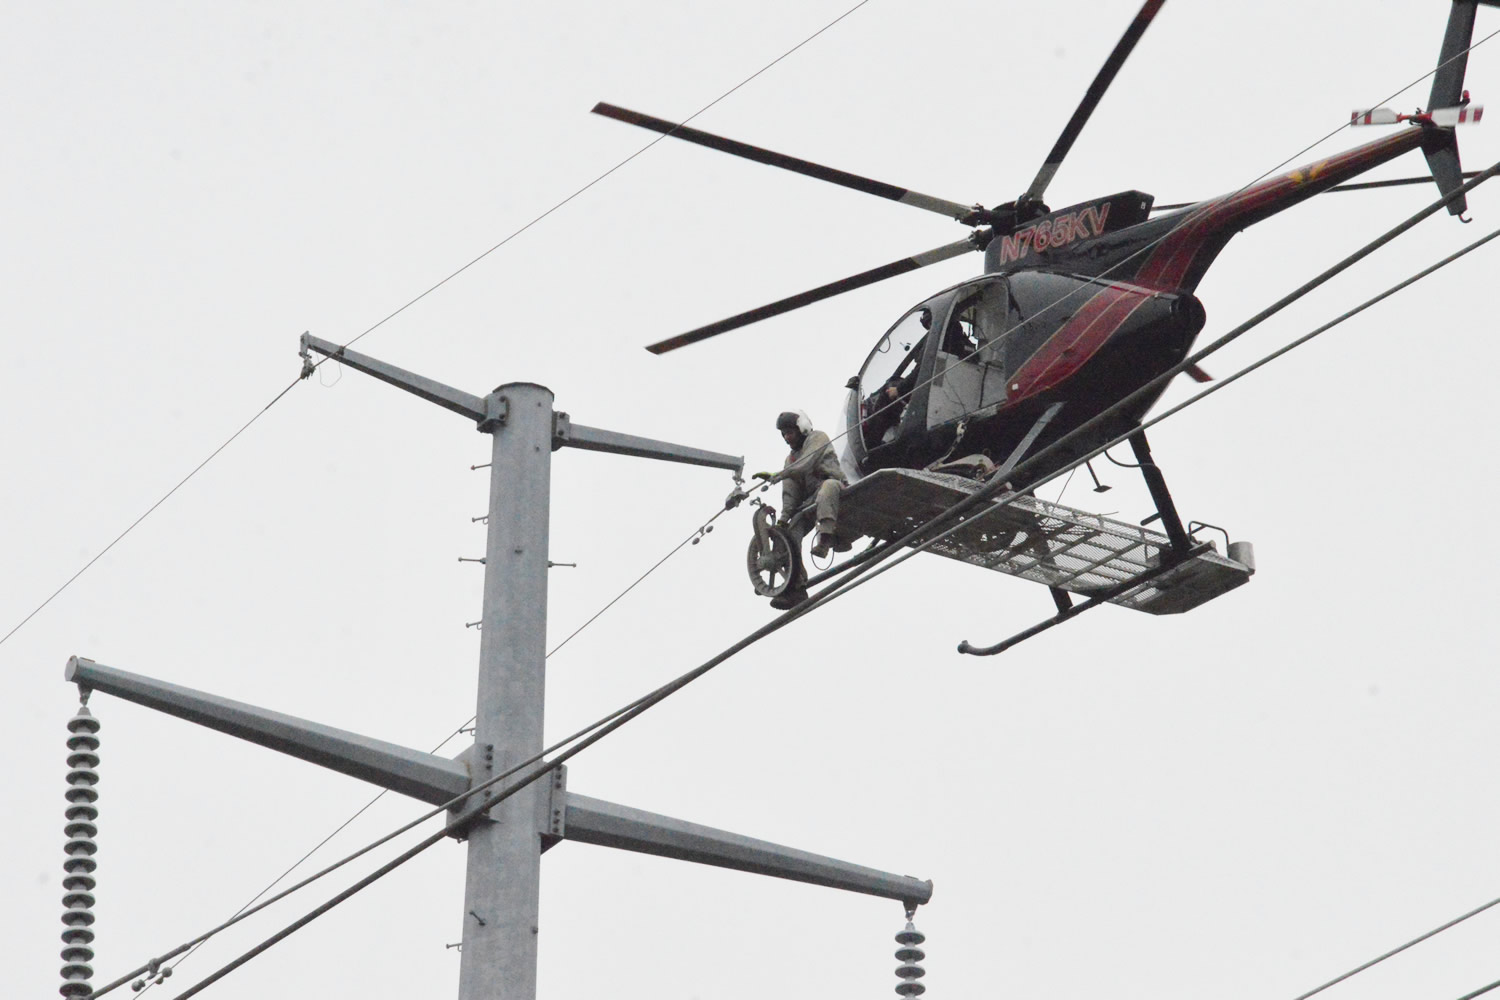 grid-construction-transmission-wire-helicopter.jpg